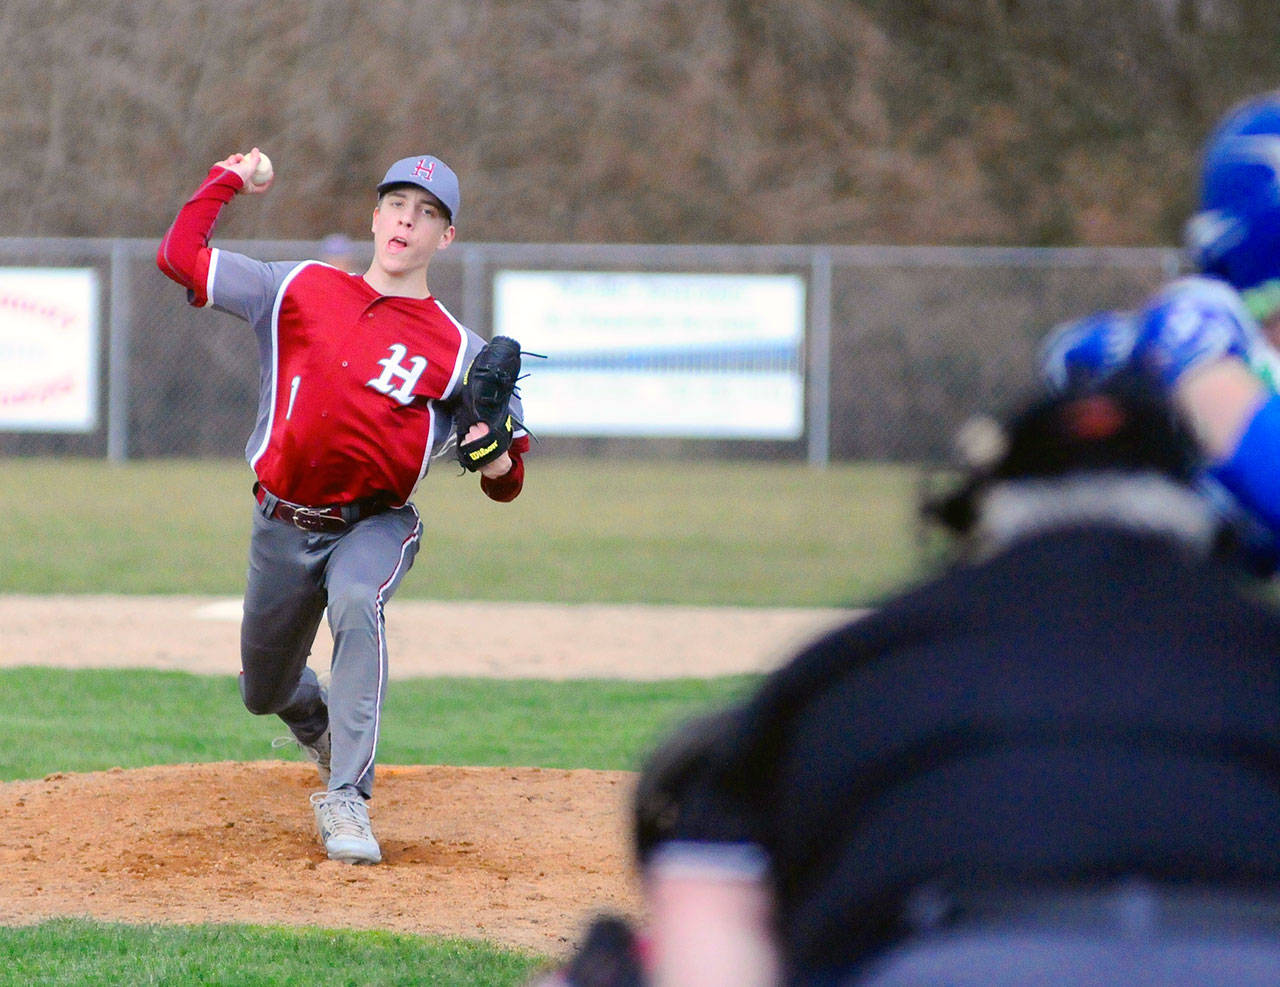 Hoquiam’s Zach Elsos delivers a pitch in the third inning of a game at Elma. Elsos was credited with the win in Hoquiam’s 6-2 victory over the Eagles on Friday. (Hasani Grayson | Grays Harbor News Group)